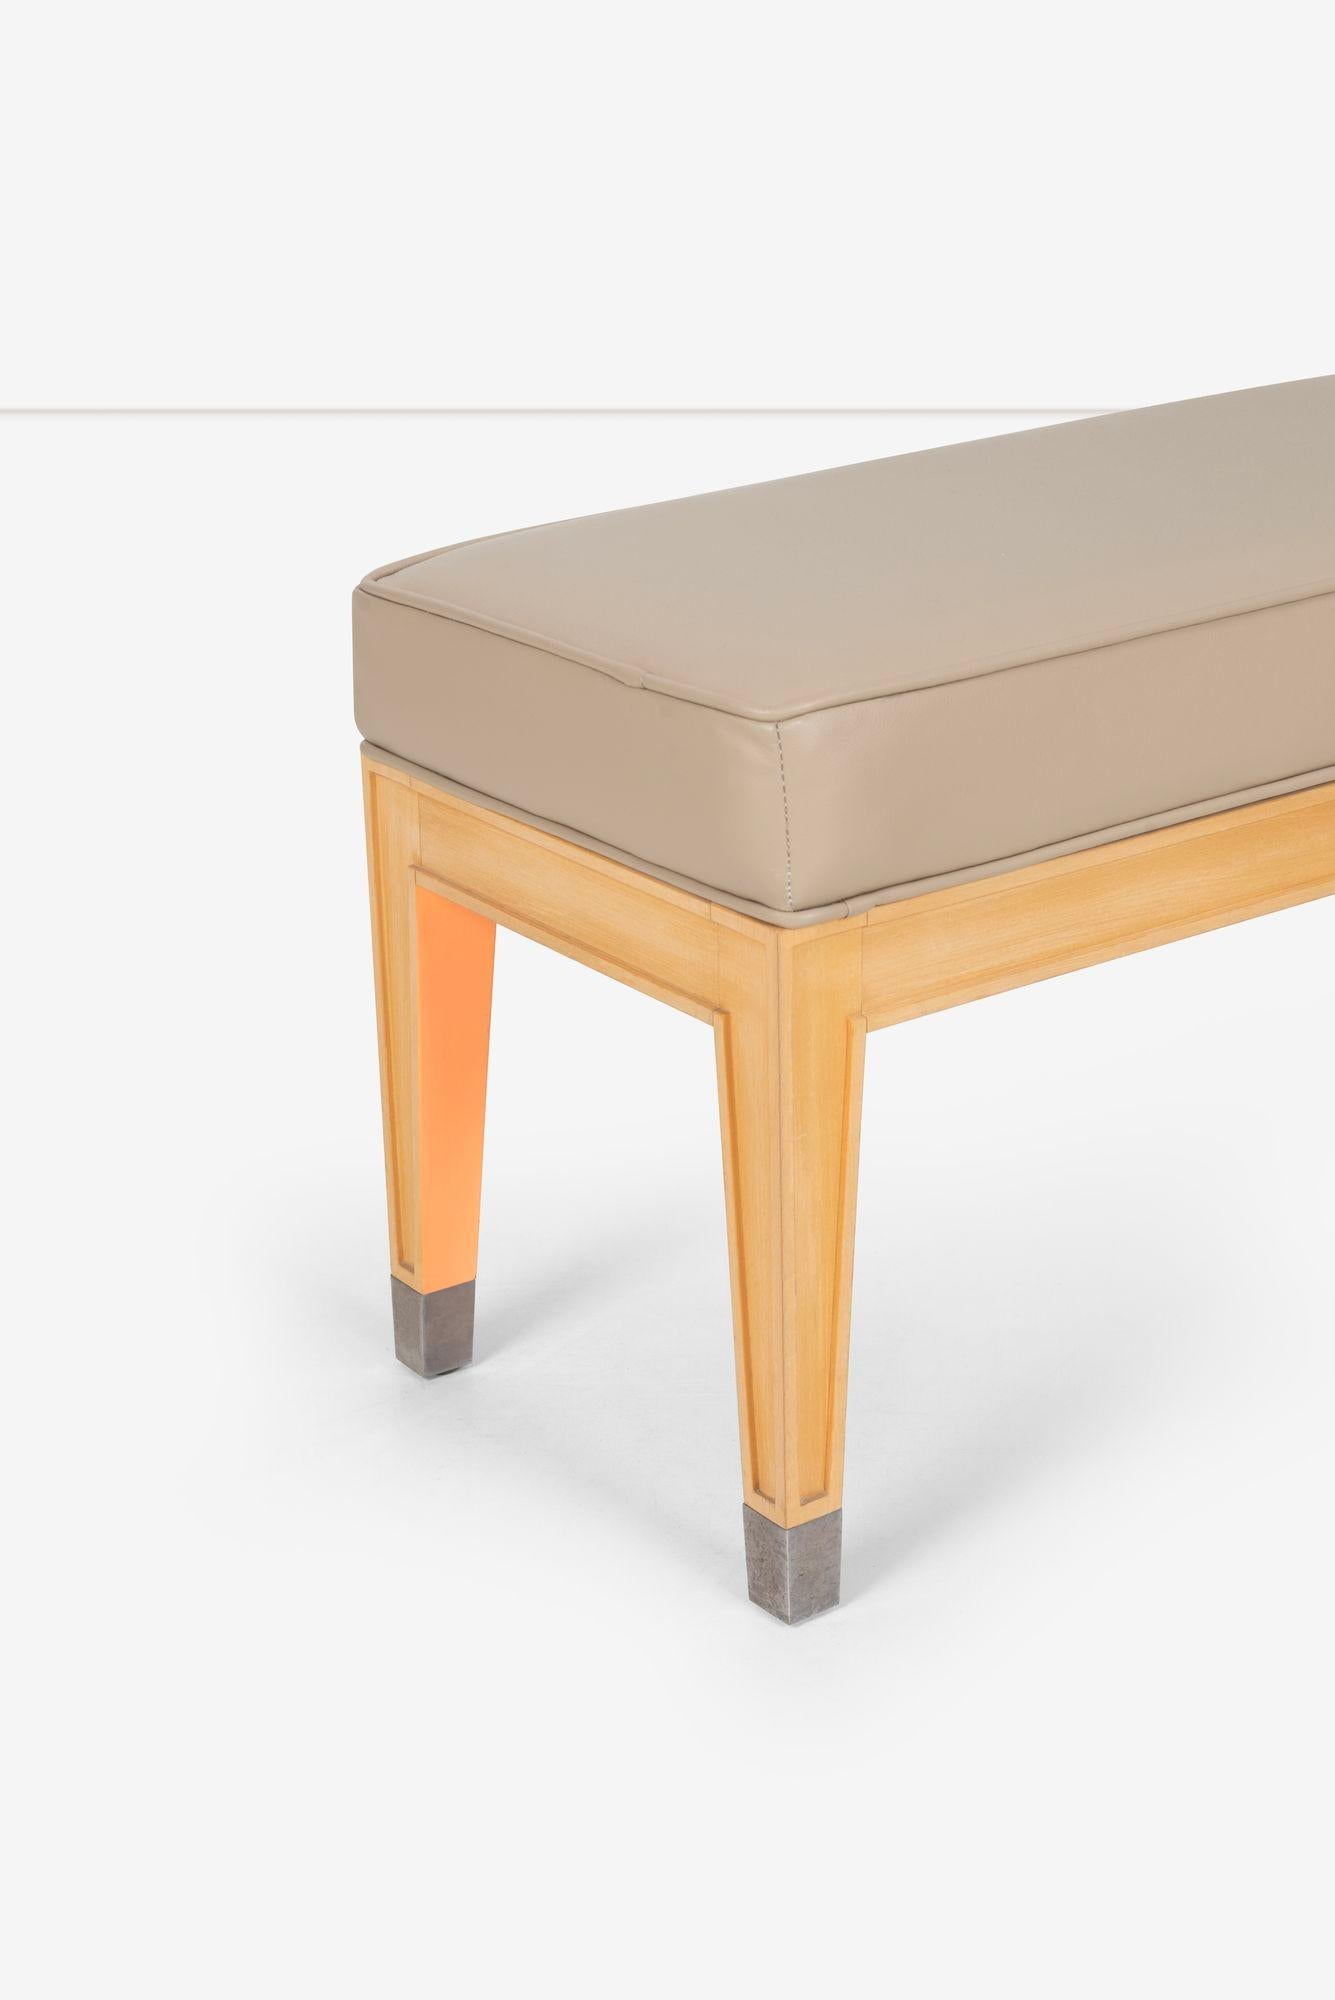 Late 20th Century Phillipe Starck Bench from The Clift Hotel San Fransisco C.A. For Sale